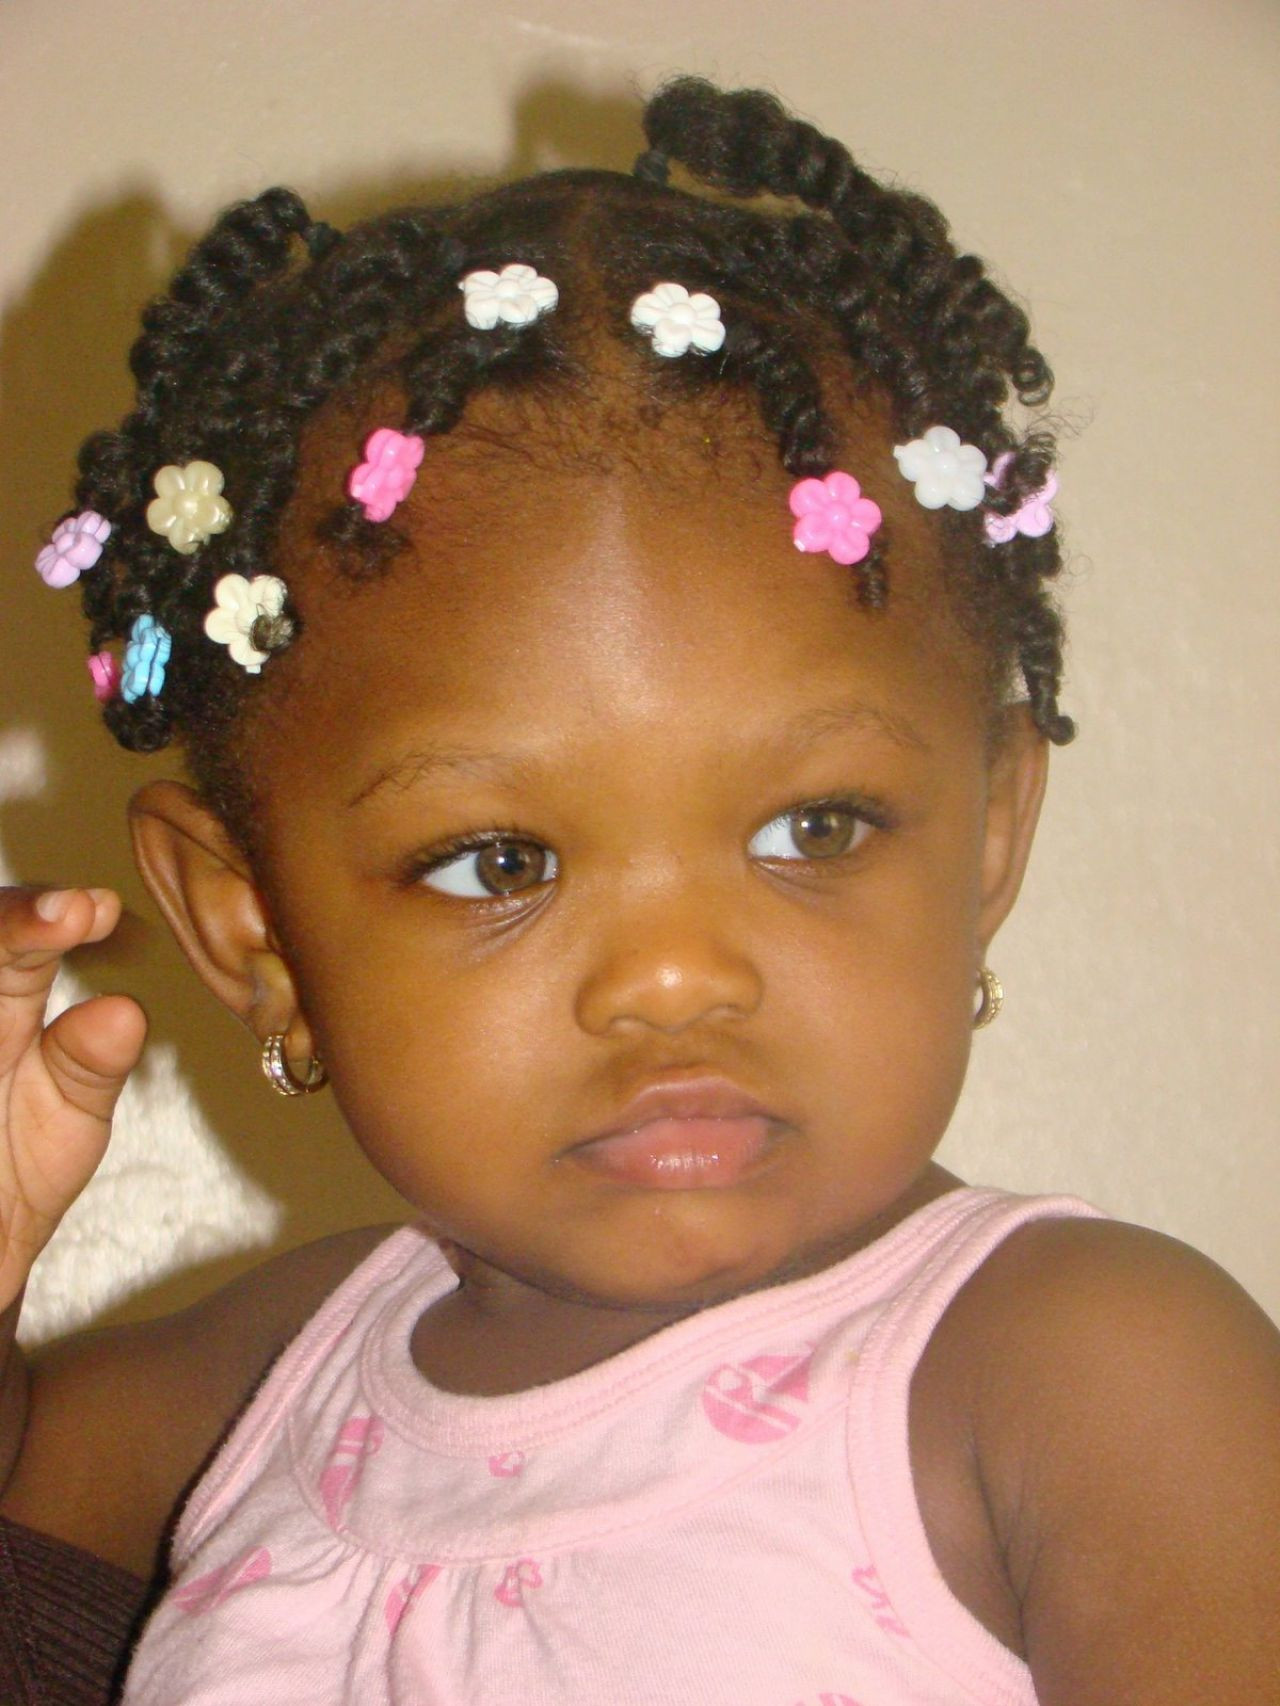 Hairstyles For Little Girls Black
 64 Cool Braided Hairstyles for Little Black Girls – HAIRSTYLES